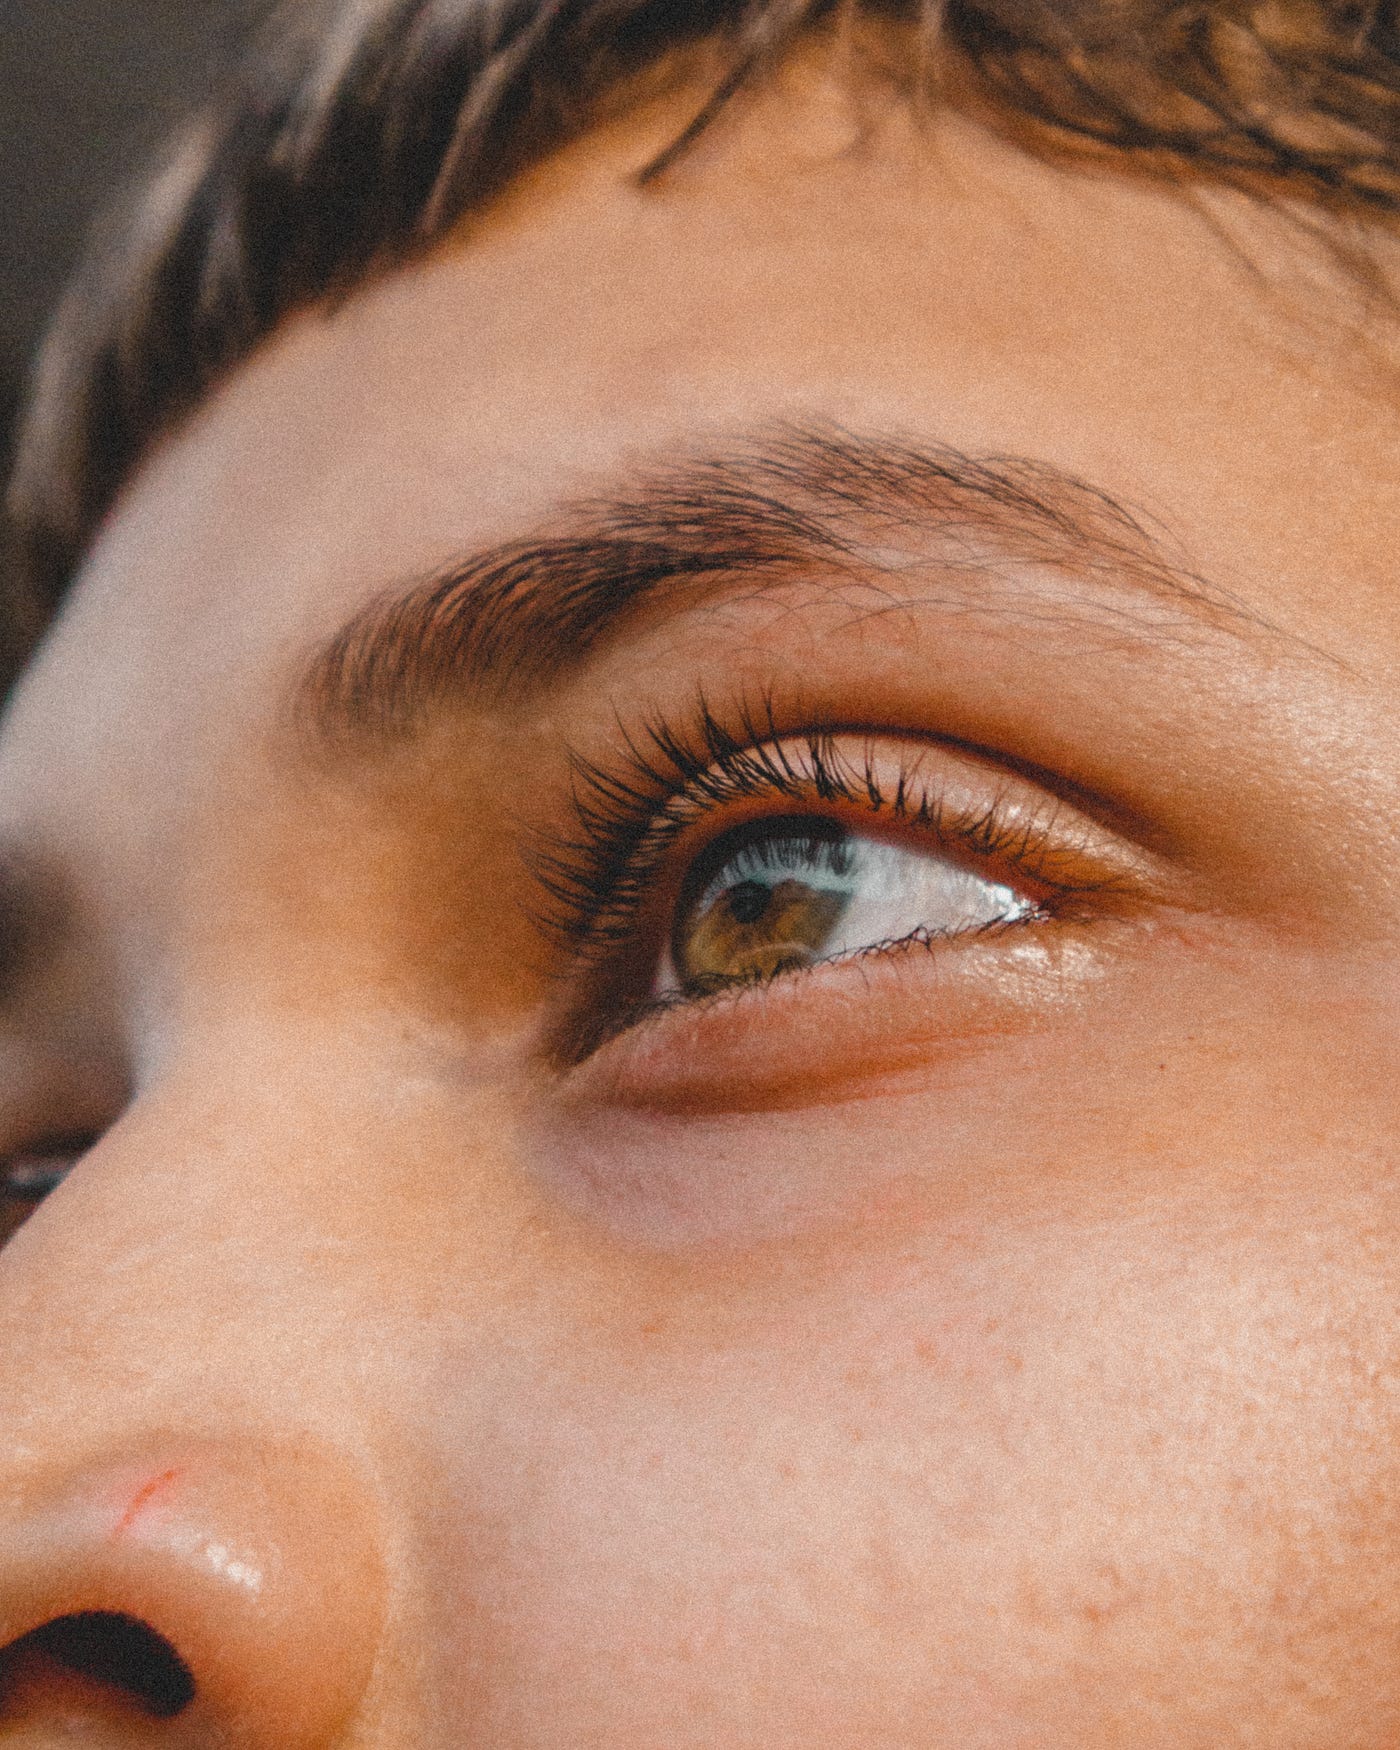 Woman’s left brown eye (and surrounding face) in close-up.